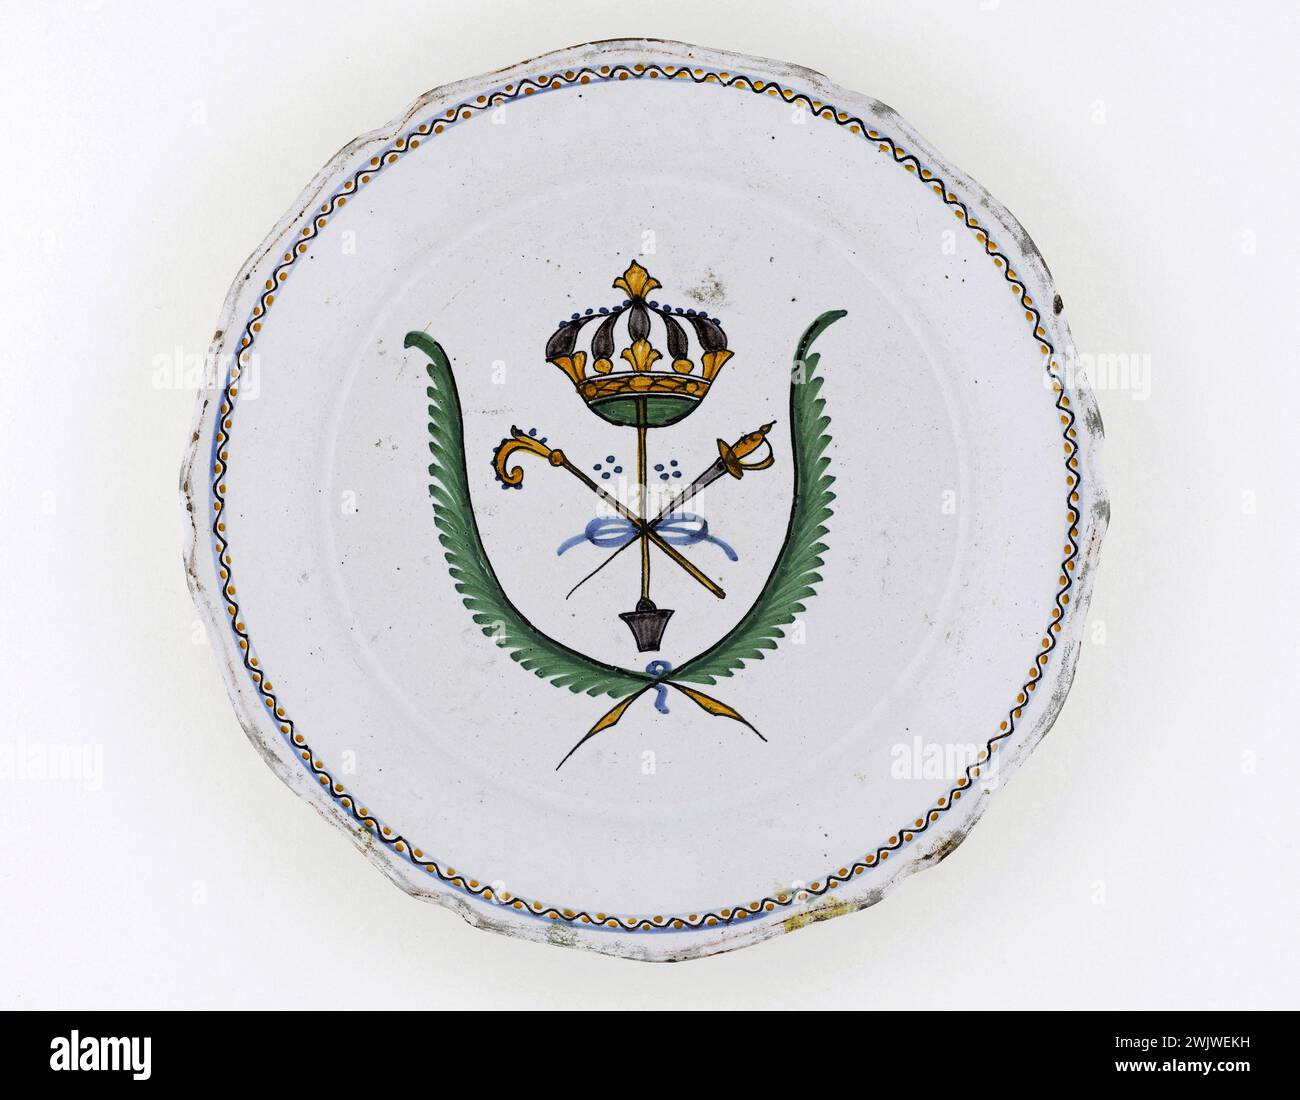 Anonymous. Plate. Earthenware. 1789. Paris, Carnavalet museum. 70955-11 Weapon, Crown, Epee, Faience, Flower, Decorative Pattern, Revolutionary Periode, French Revolution, Crockery, Plate Stock Photo